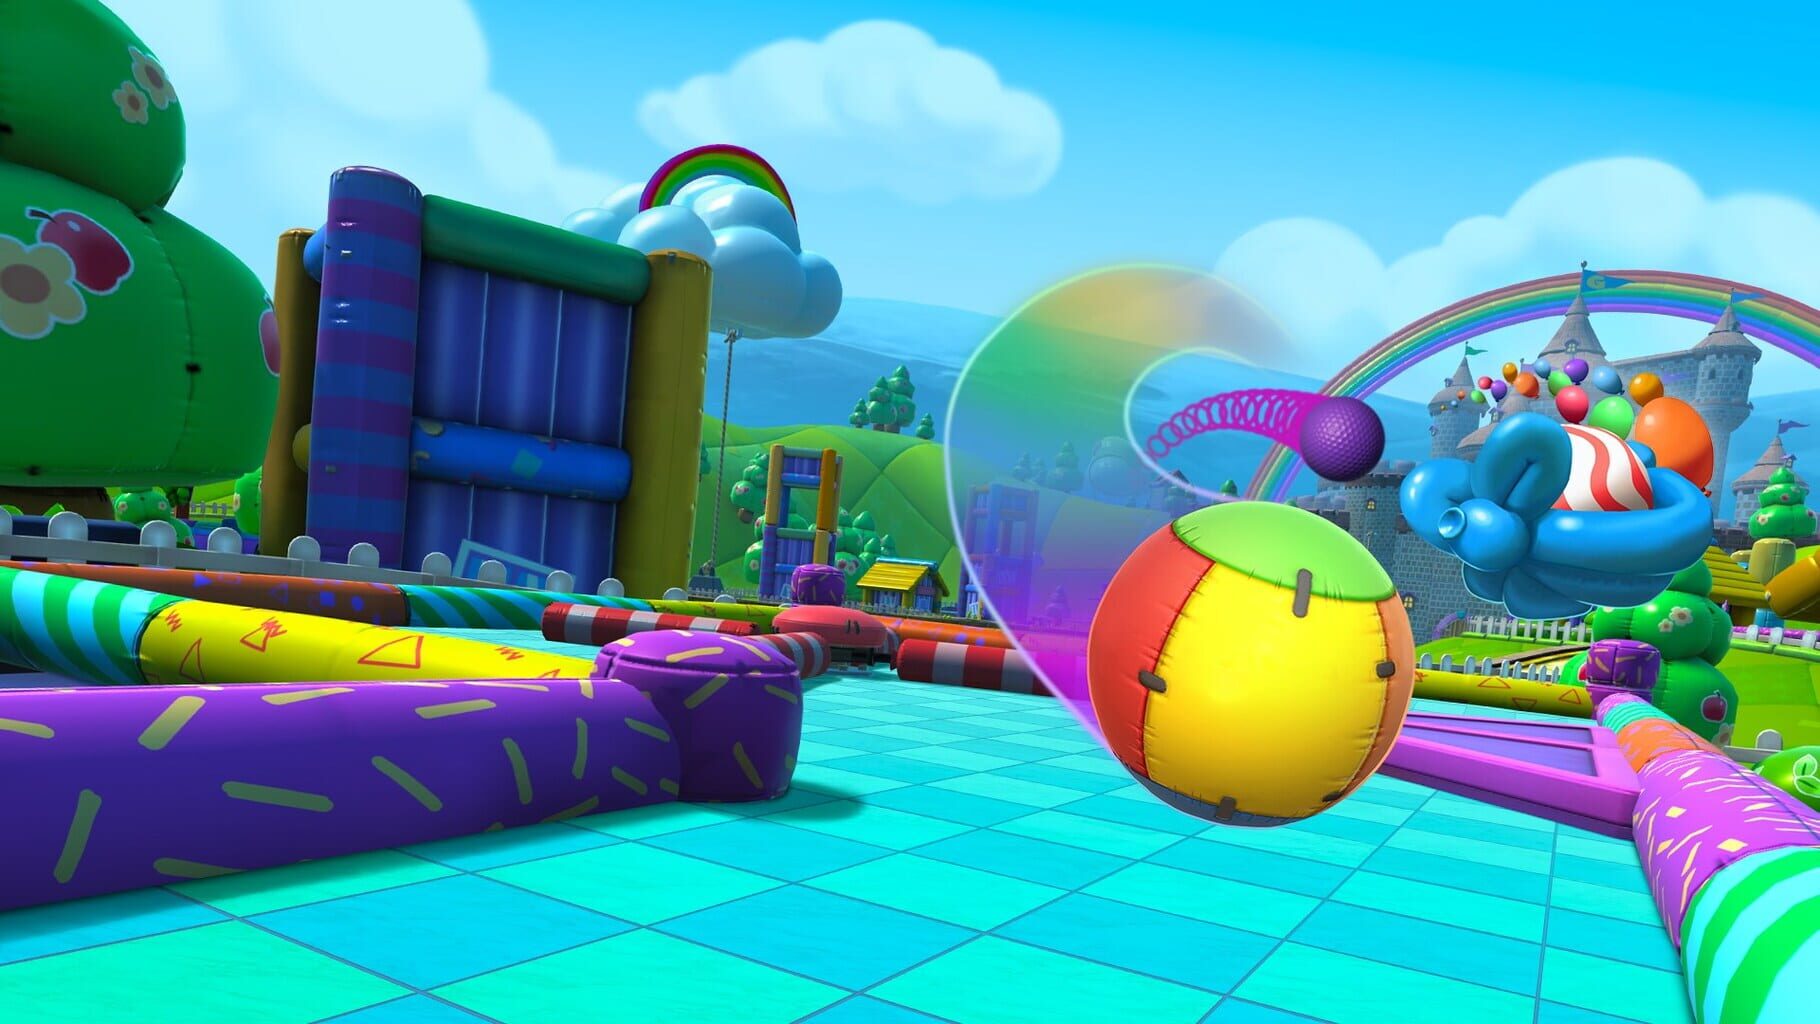 Golf With Your Friends: Bouncy Castle Course artwork